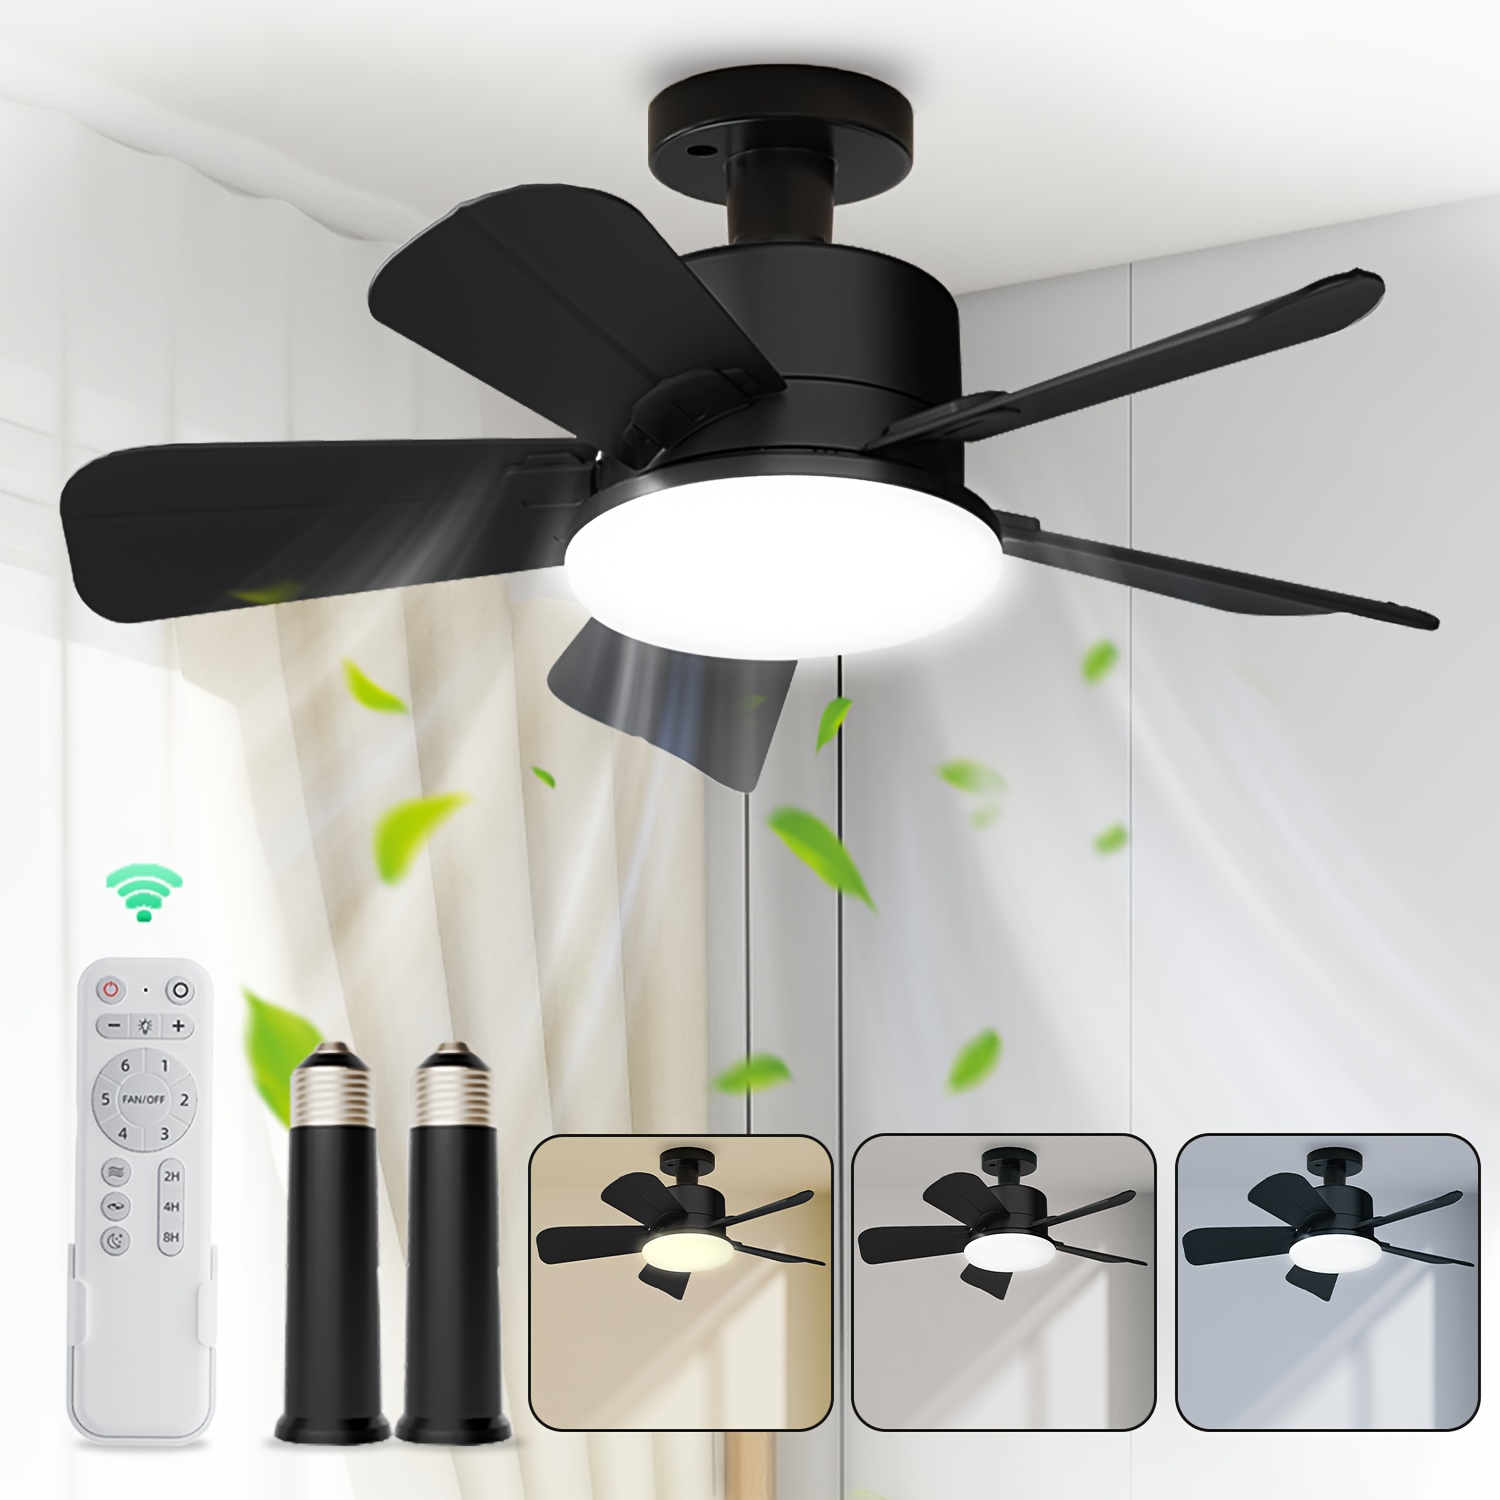 

Socket Fan Light With Remote, Light Bulb Fan With 6 Wind Speeds, 3 Color Dimmable Light Socket Ceiling Fan Up To 1200lm/6500k, Timing Function, Reversible Air Circulation, For Kitchen, Garage